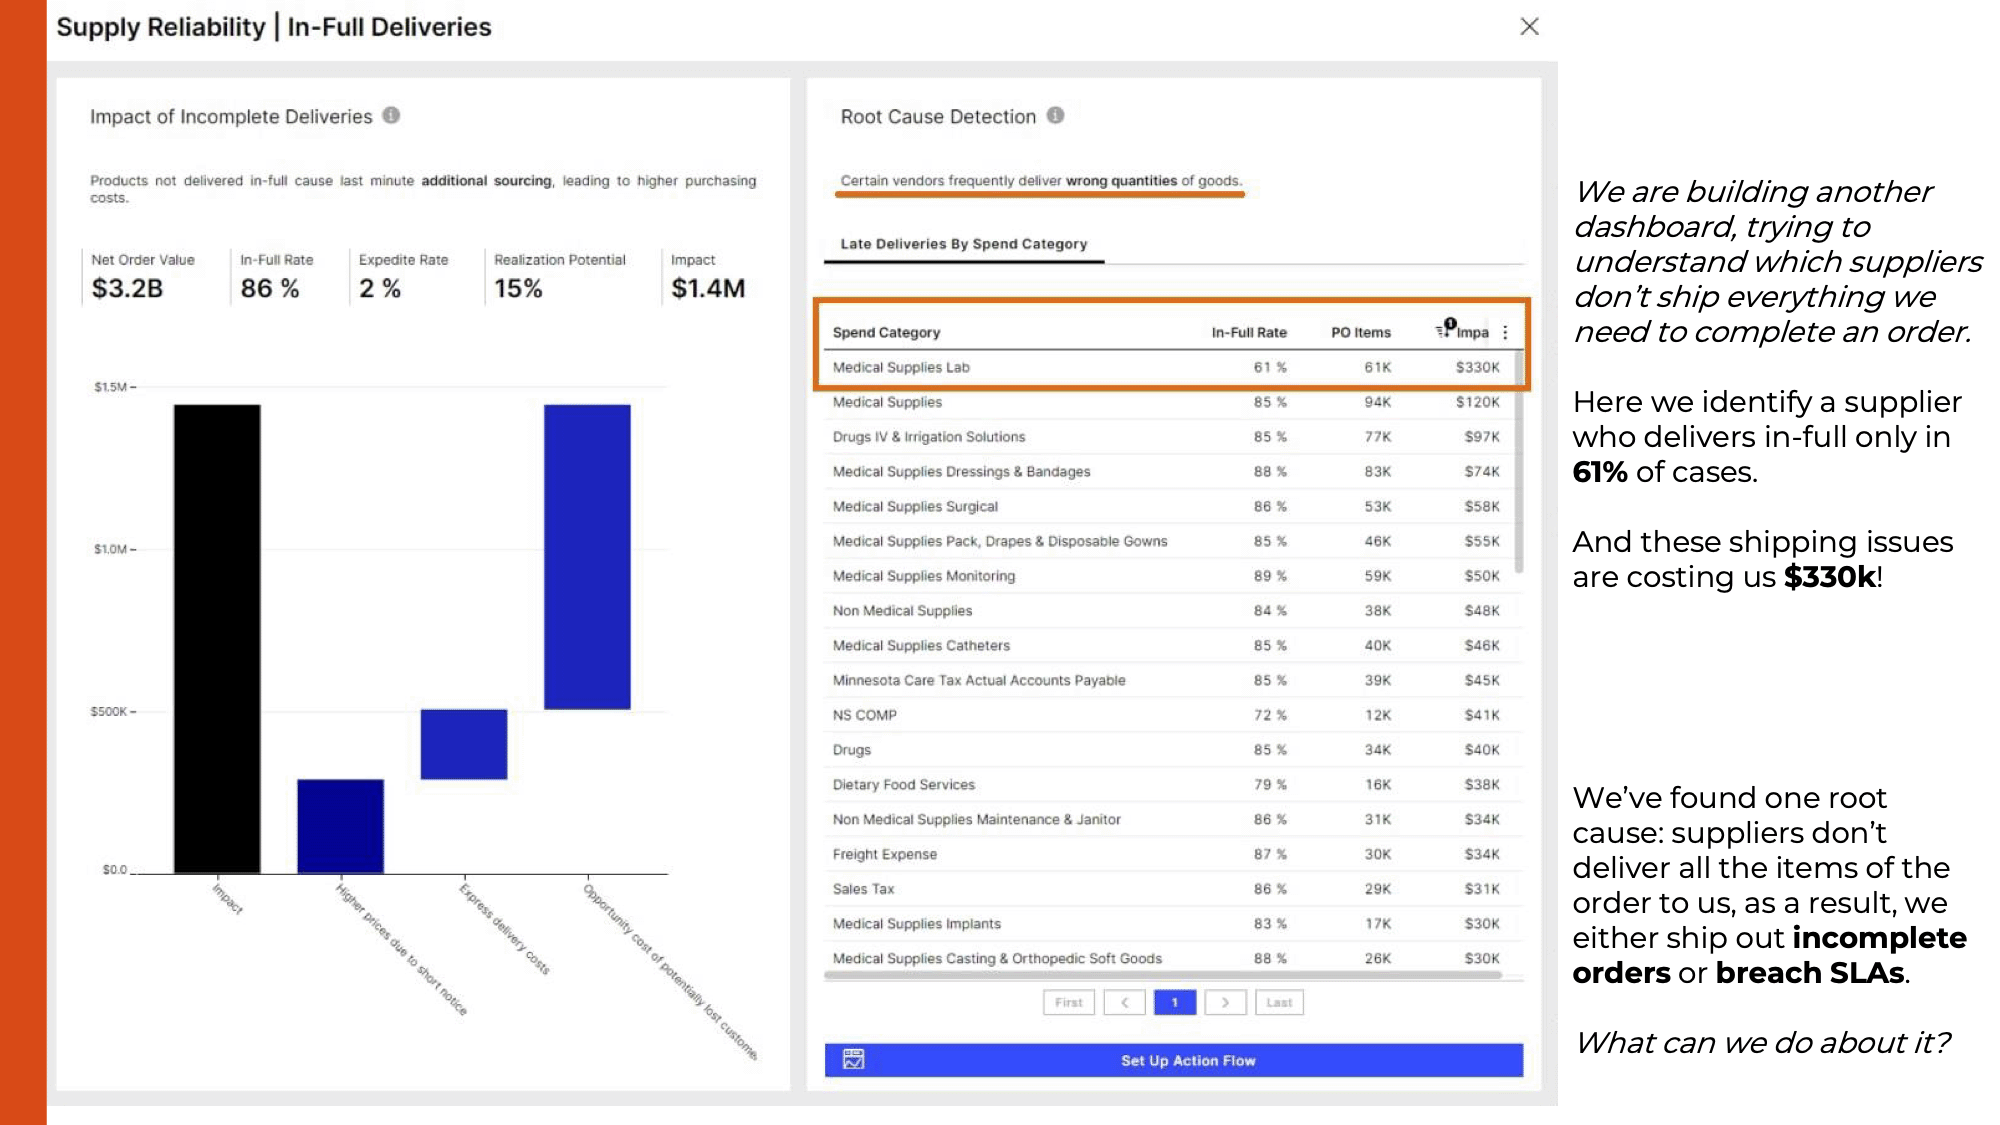 In another dashboard, we can see which suppliers tend not to complete deliveries in full, and the impact on our bottom line.